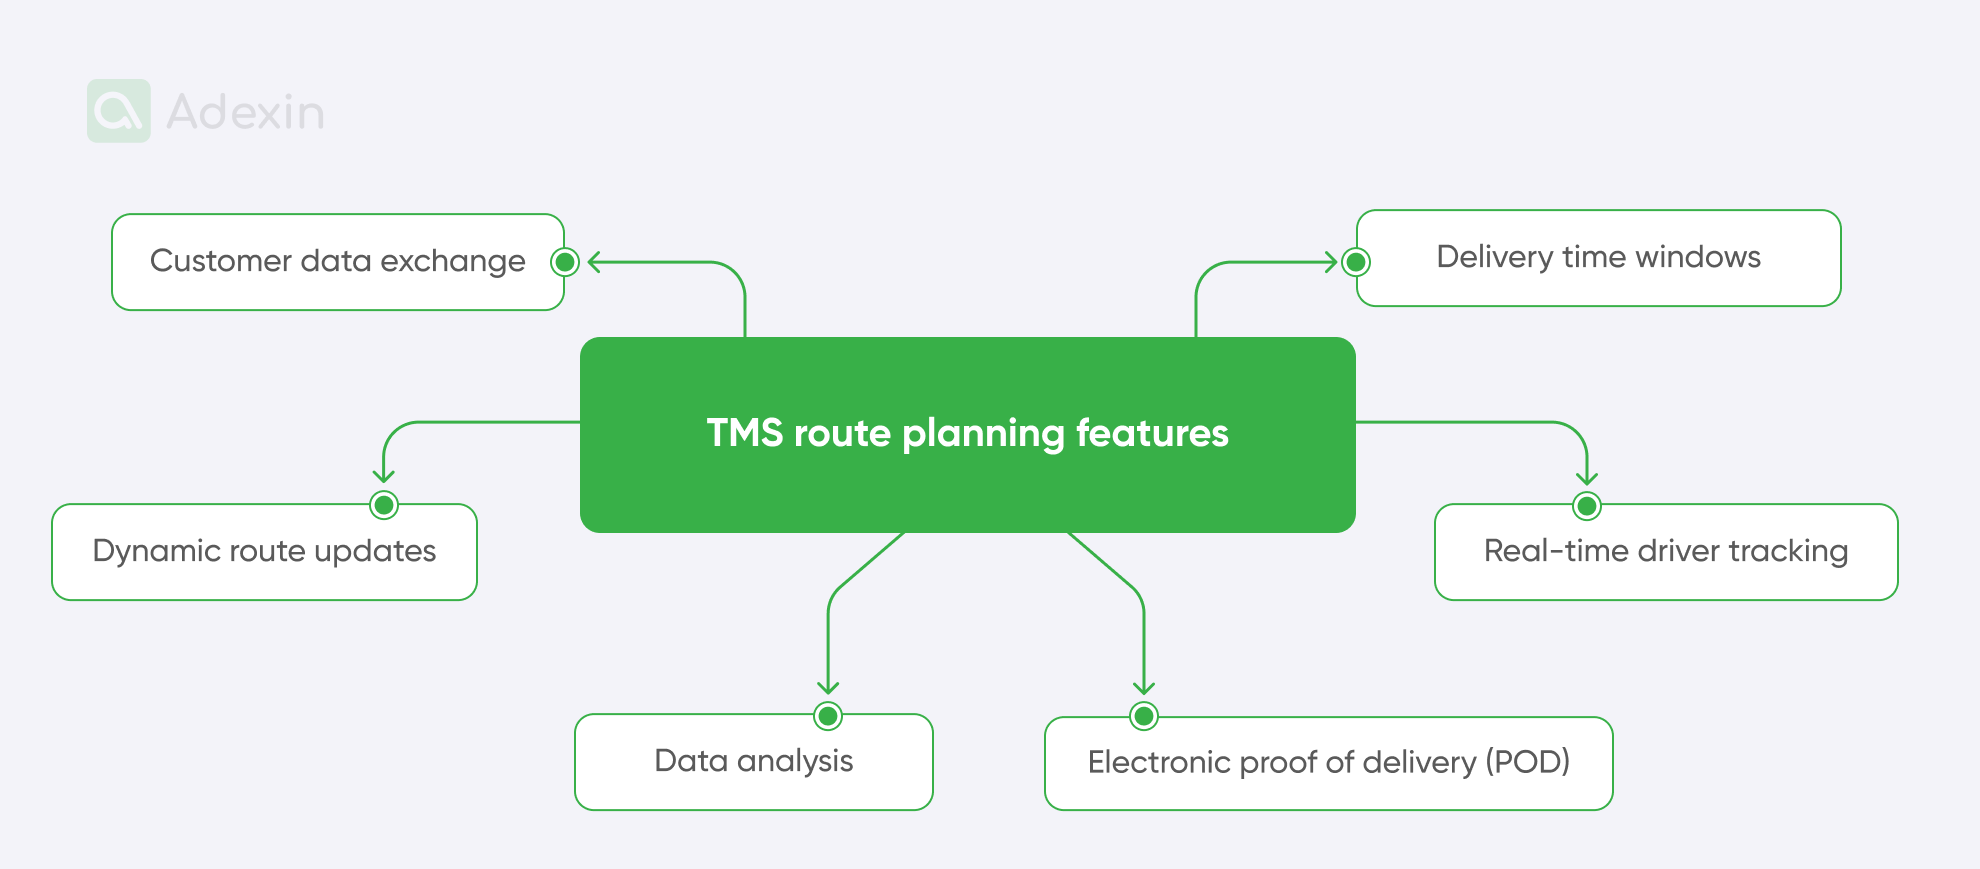 TMS route planning features